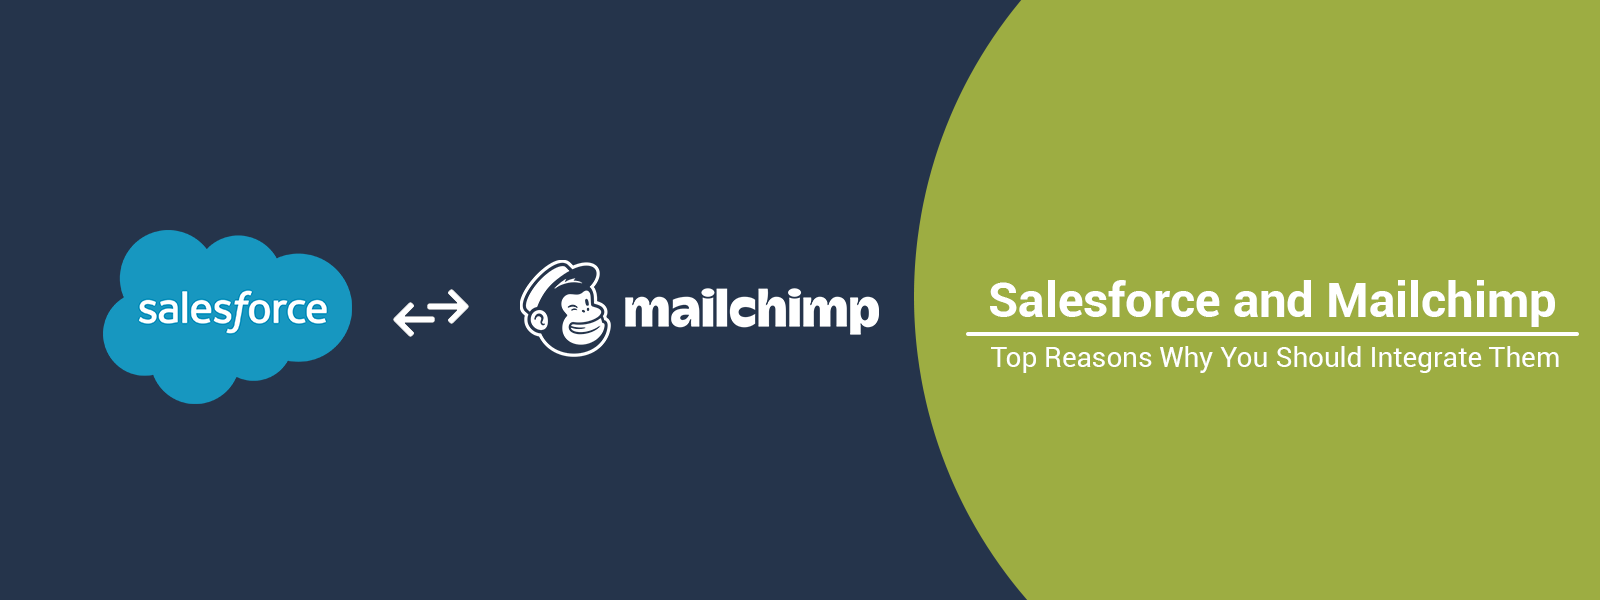 salesforce and mailchimp: top reasons why you shuld integrate them